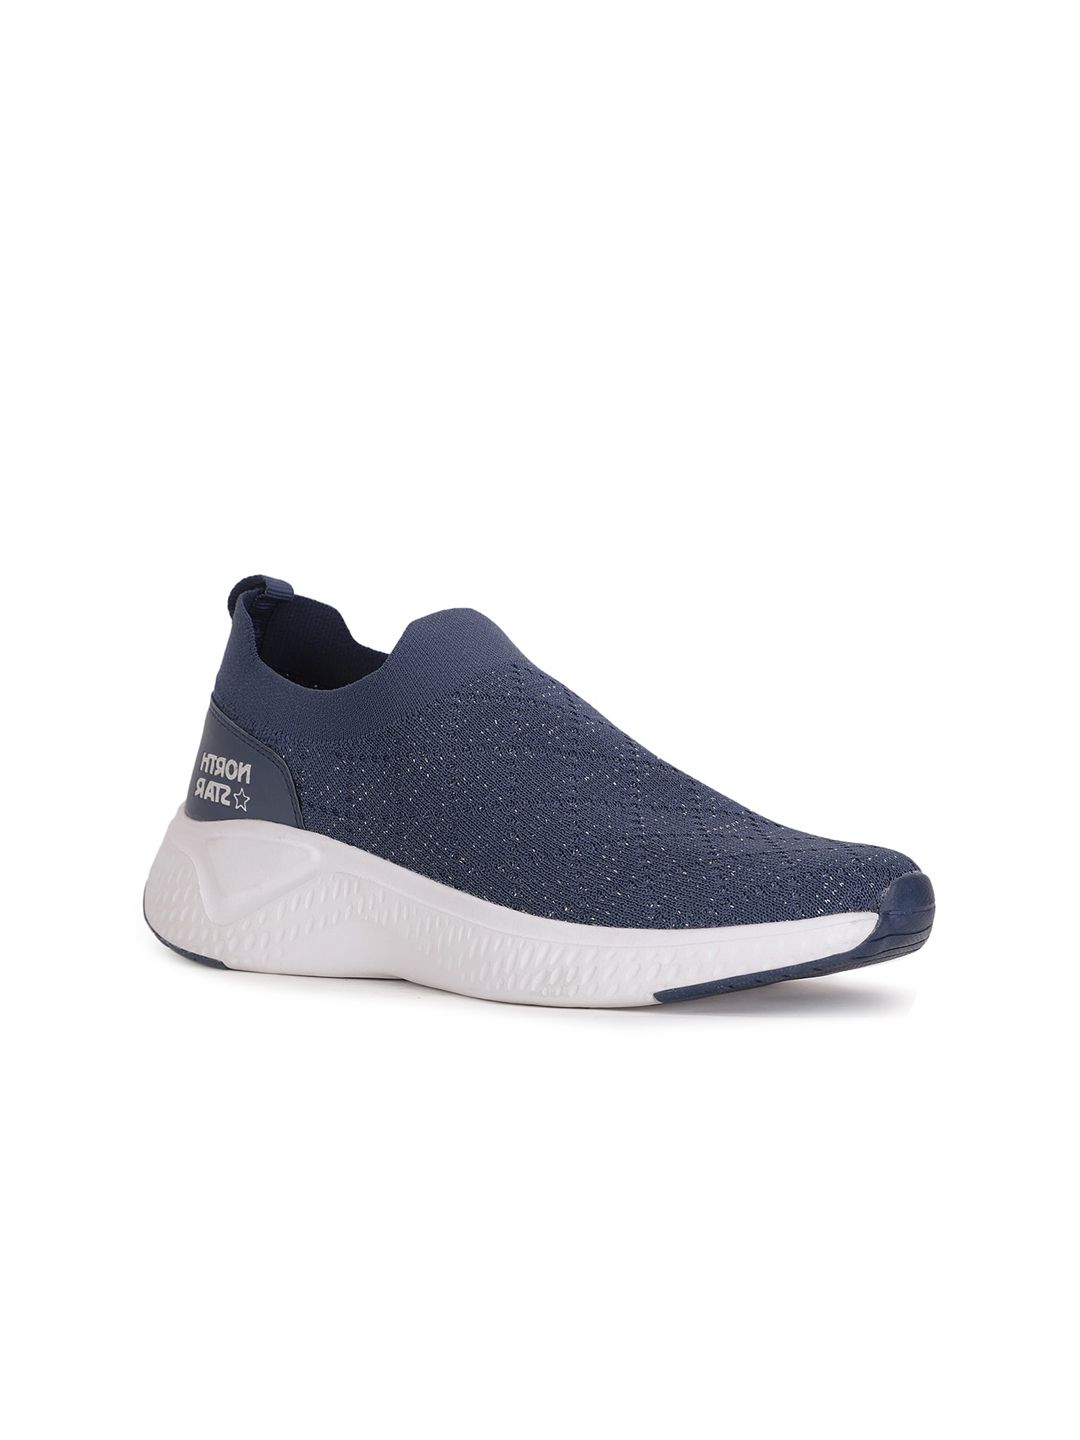 North Star Women Blue Woven Design Slip-On Sneakers Price in India